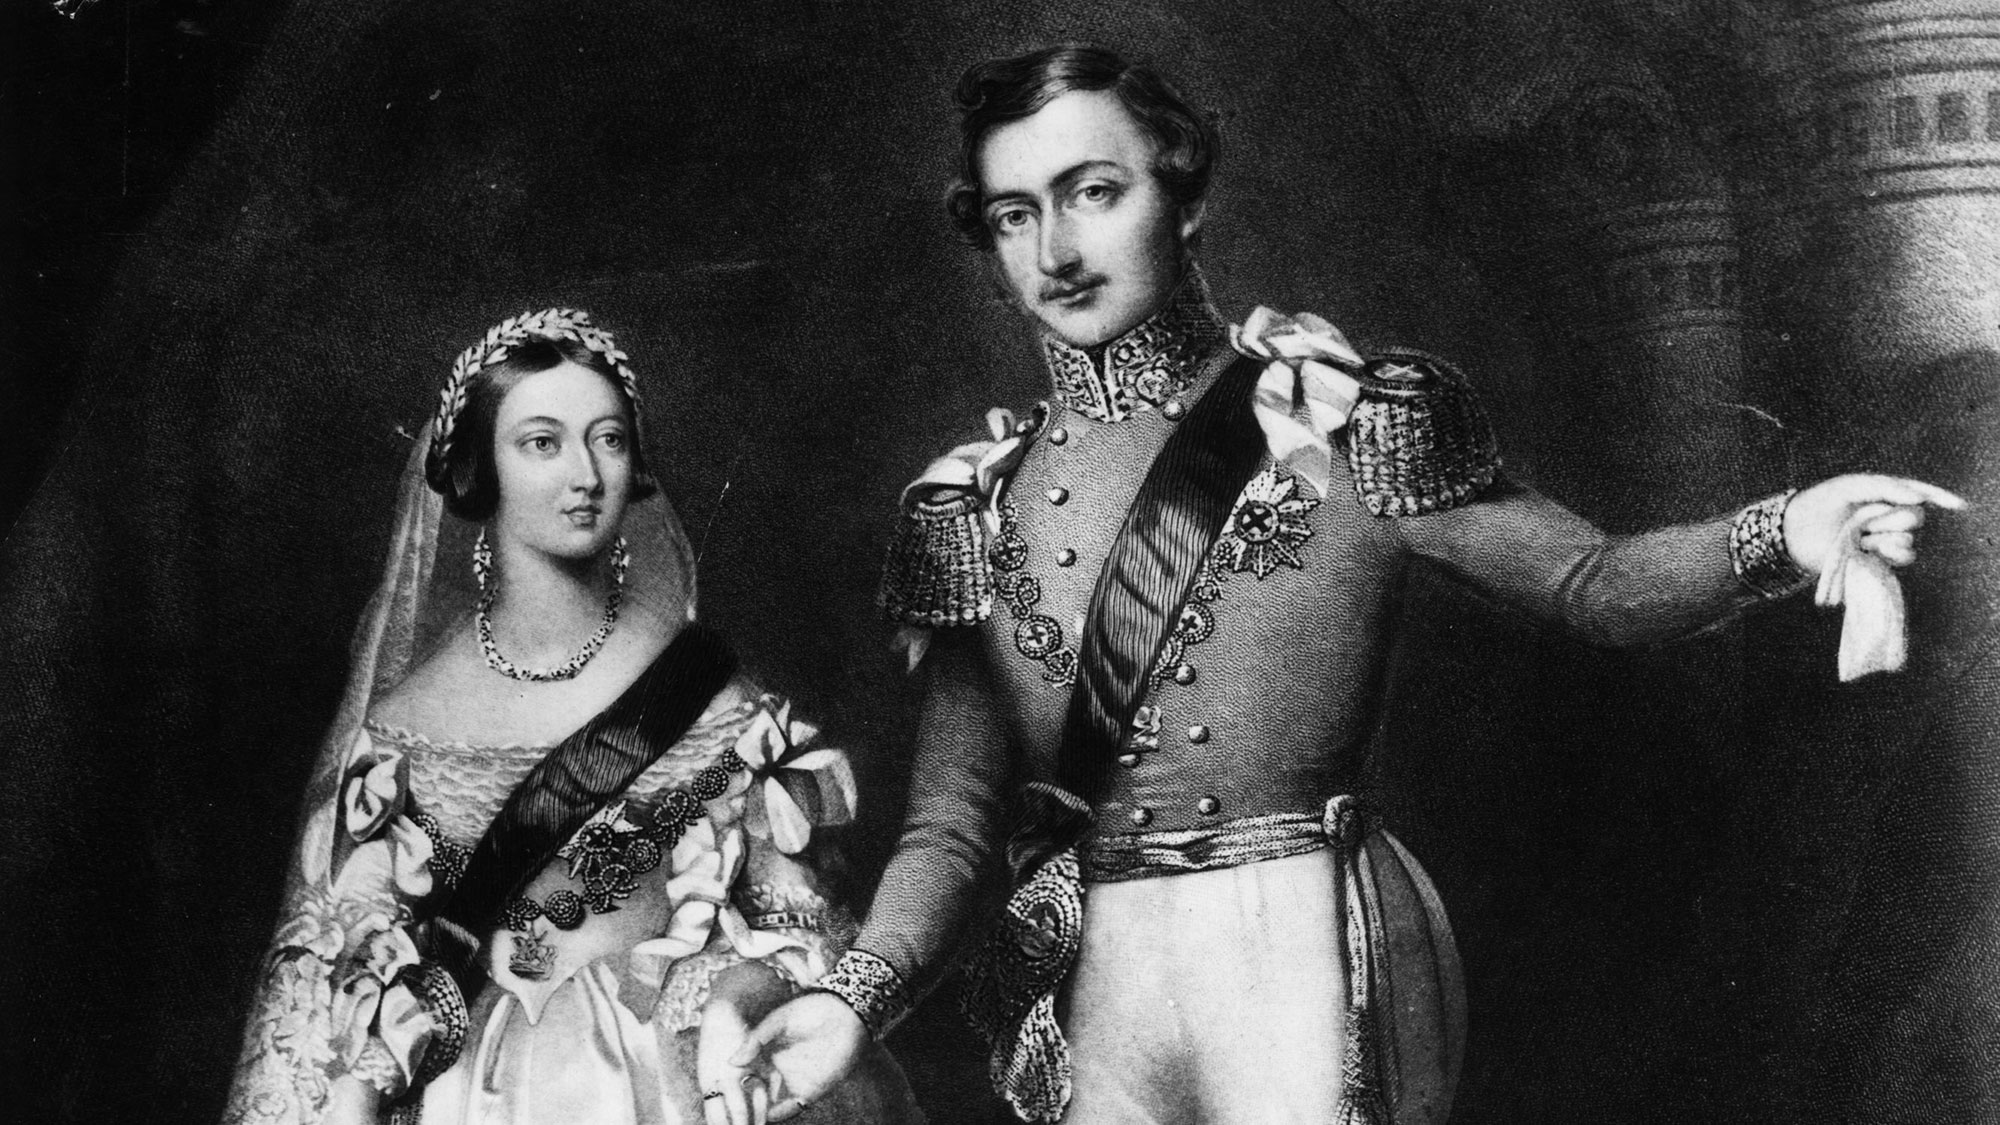 Did you know Queen Victoria started this major wedding trend?